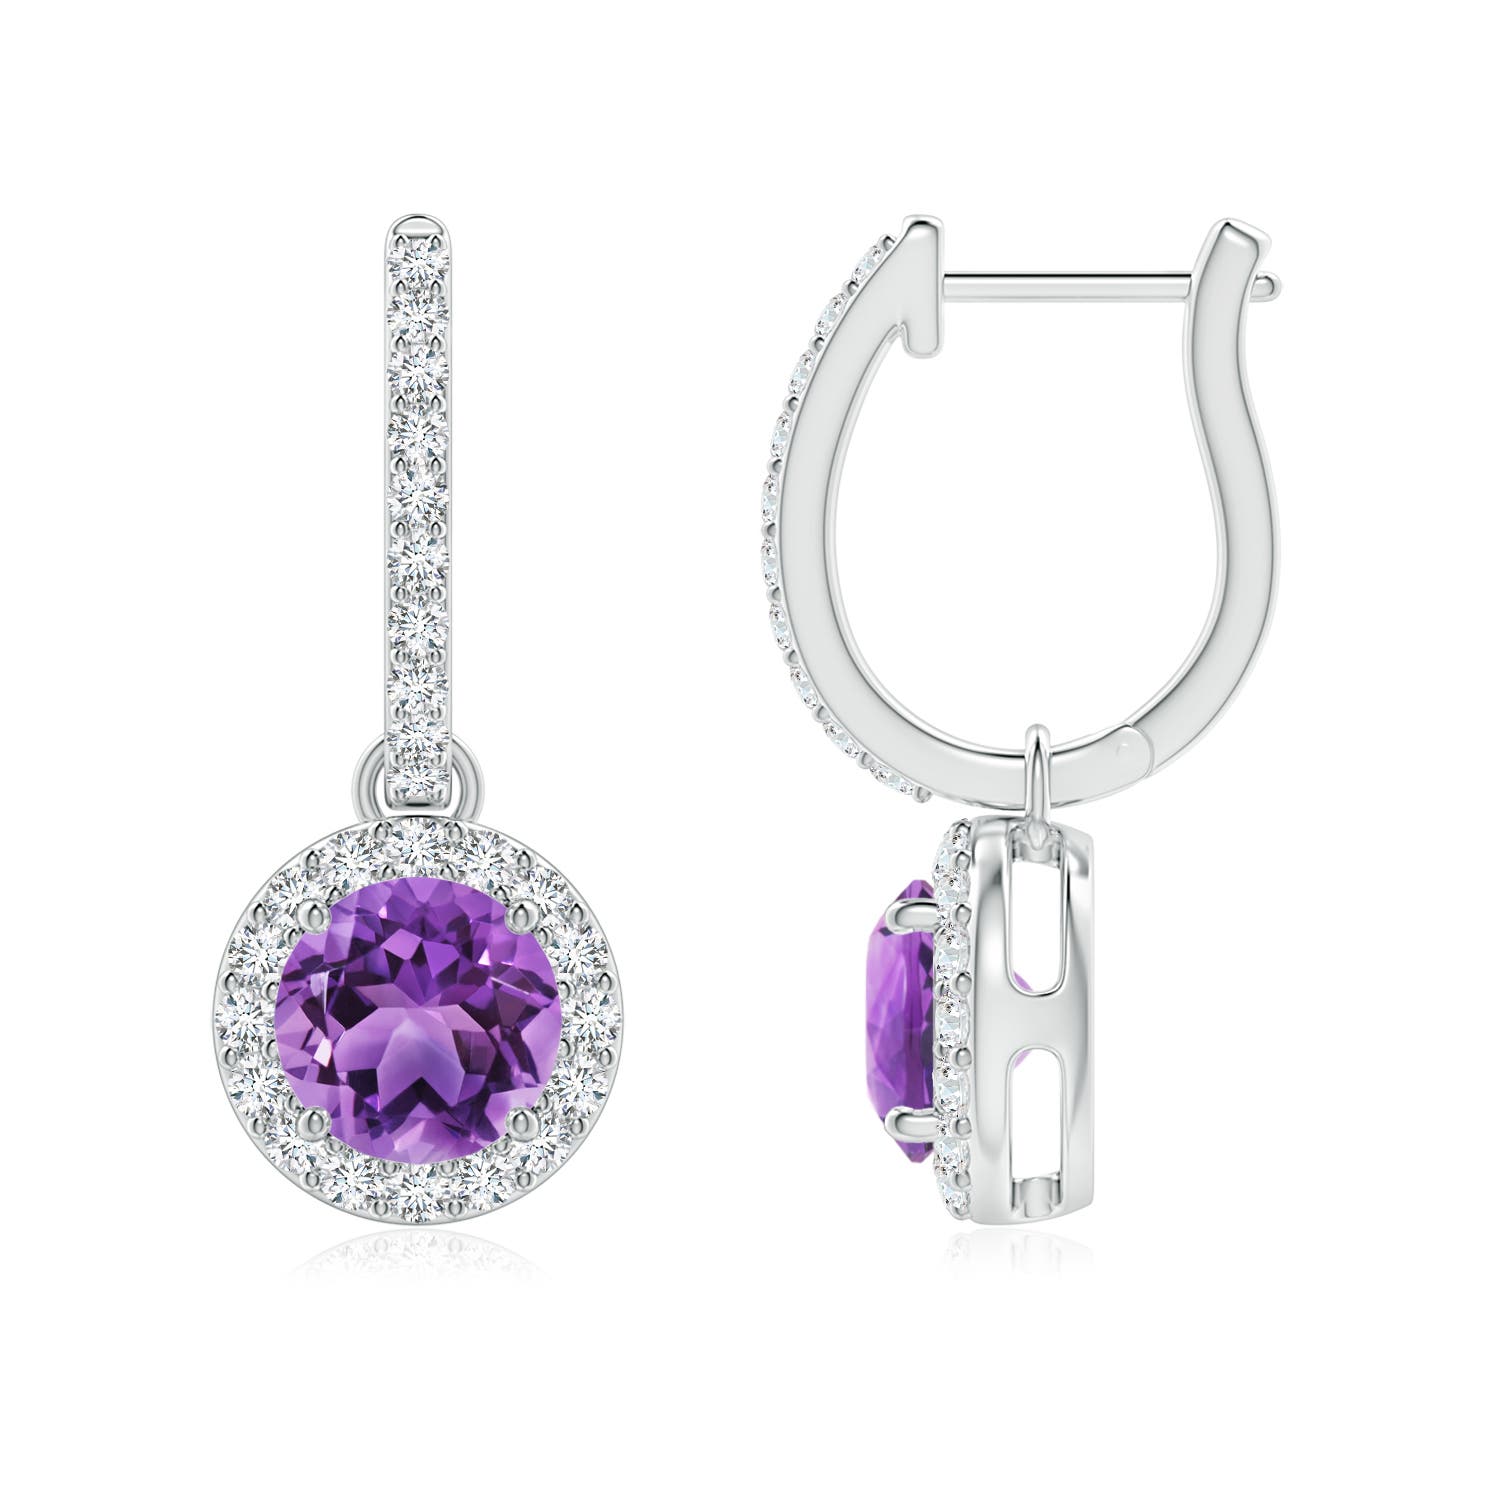 AA - Amethyst / 2.12 CT / 14 KT White Gold